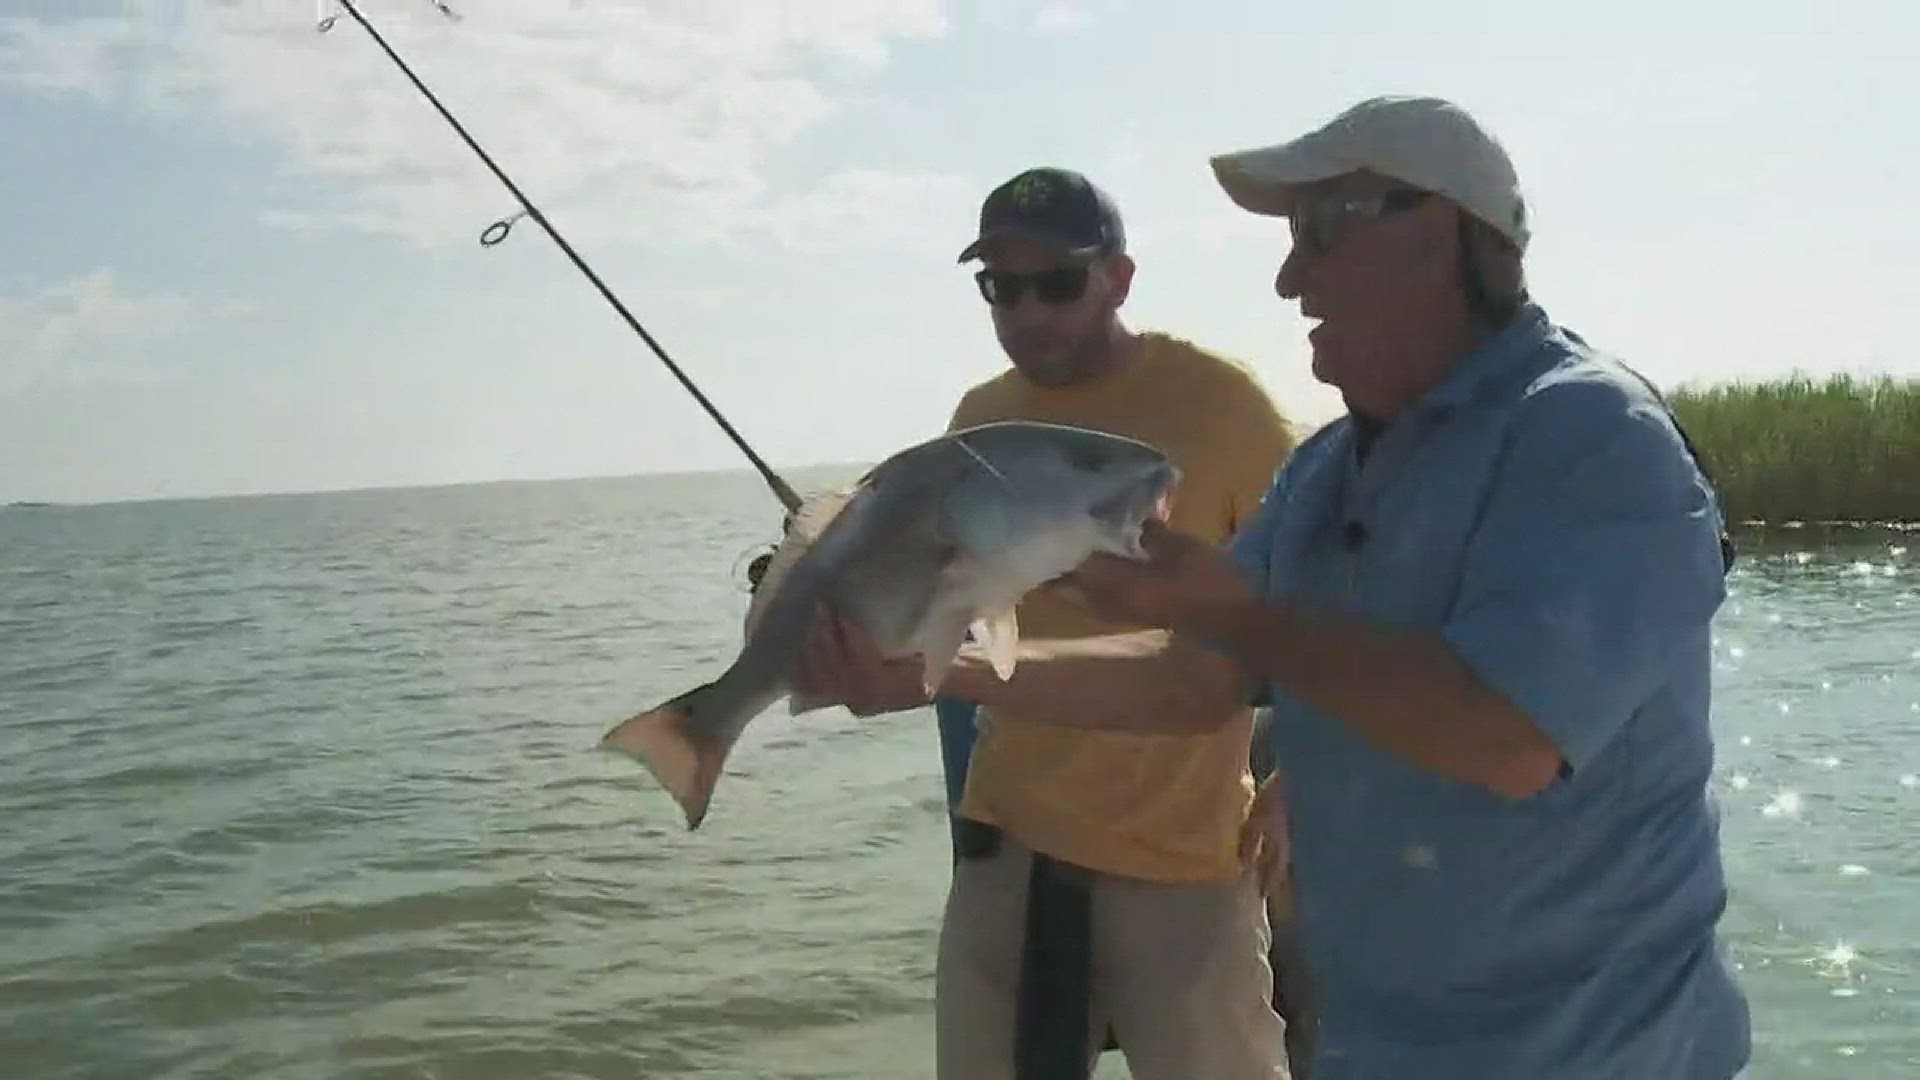 September is a transition month for speckled trout, but Don Dubuc has some tips for catching redfish in Plaquemines Parish. 9/14/17.